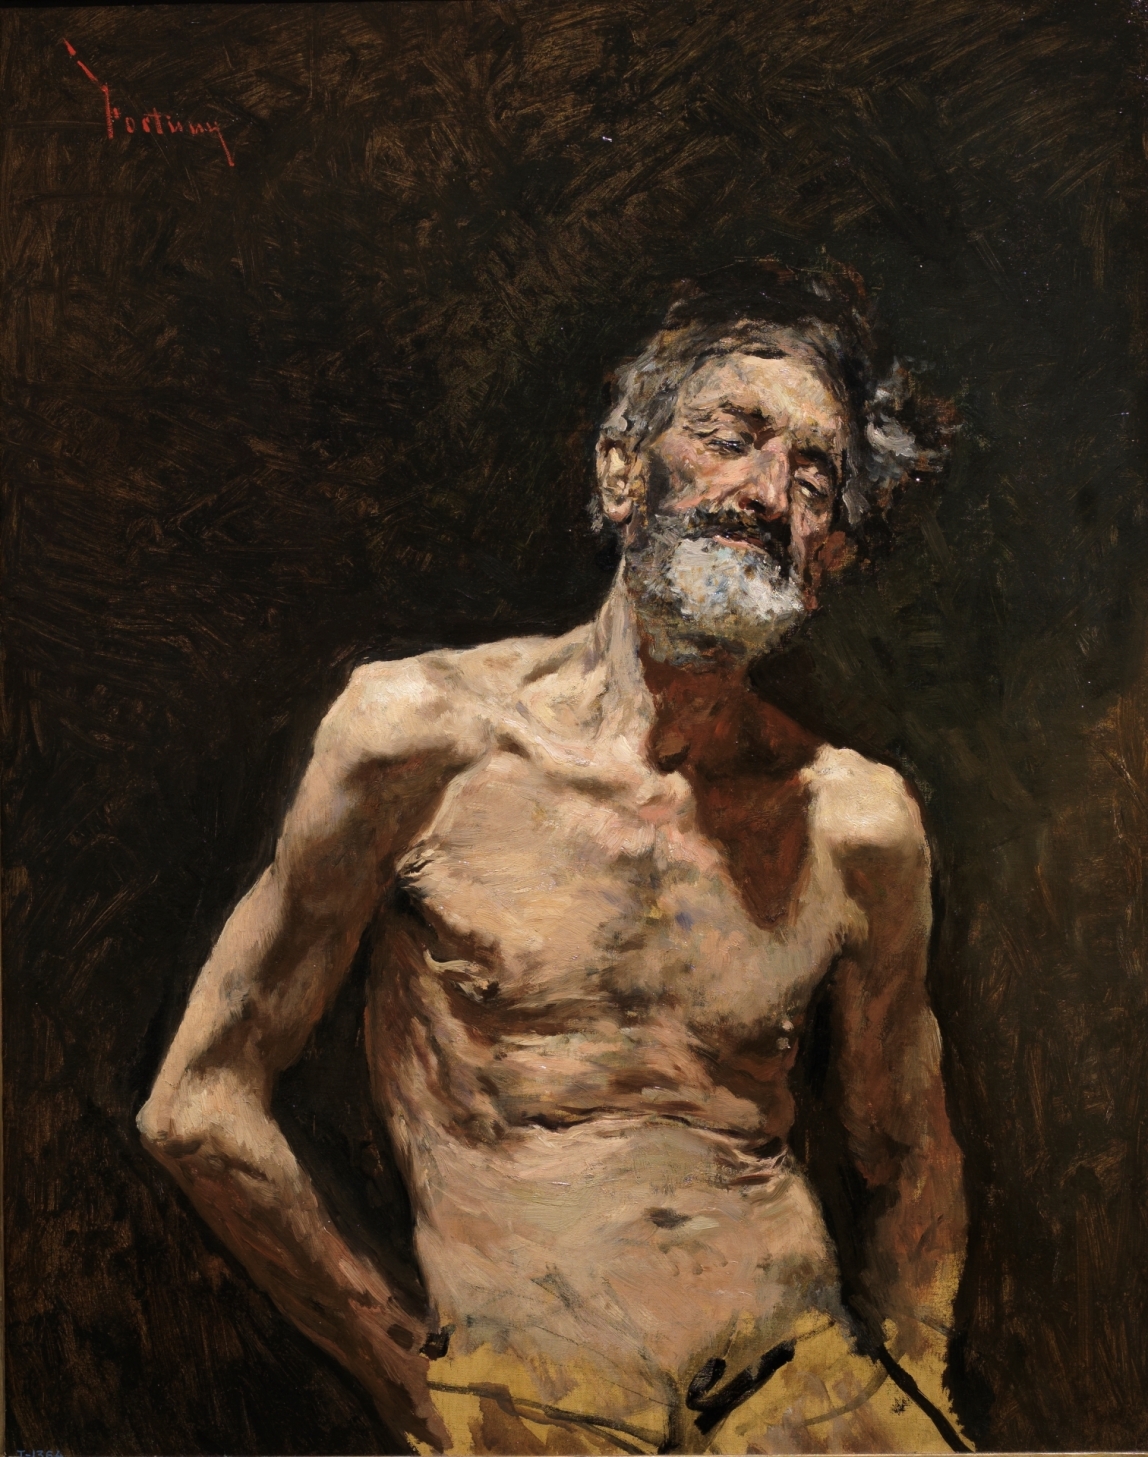 Nude Old Man in the Sun by Mariano Fortuny y Marsal. 